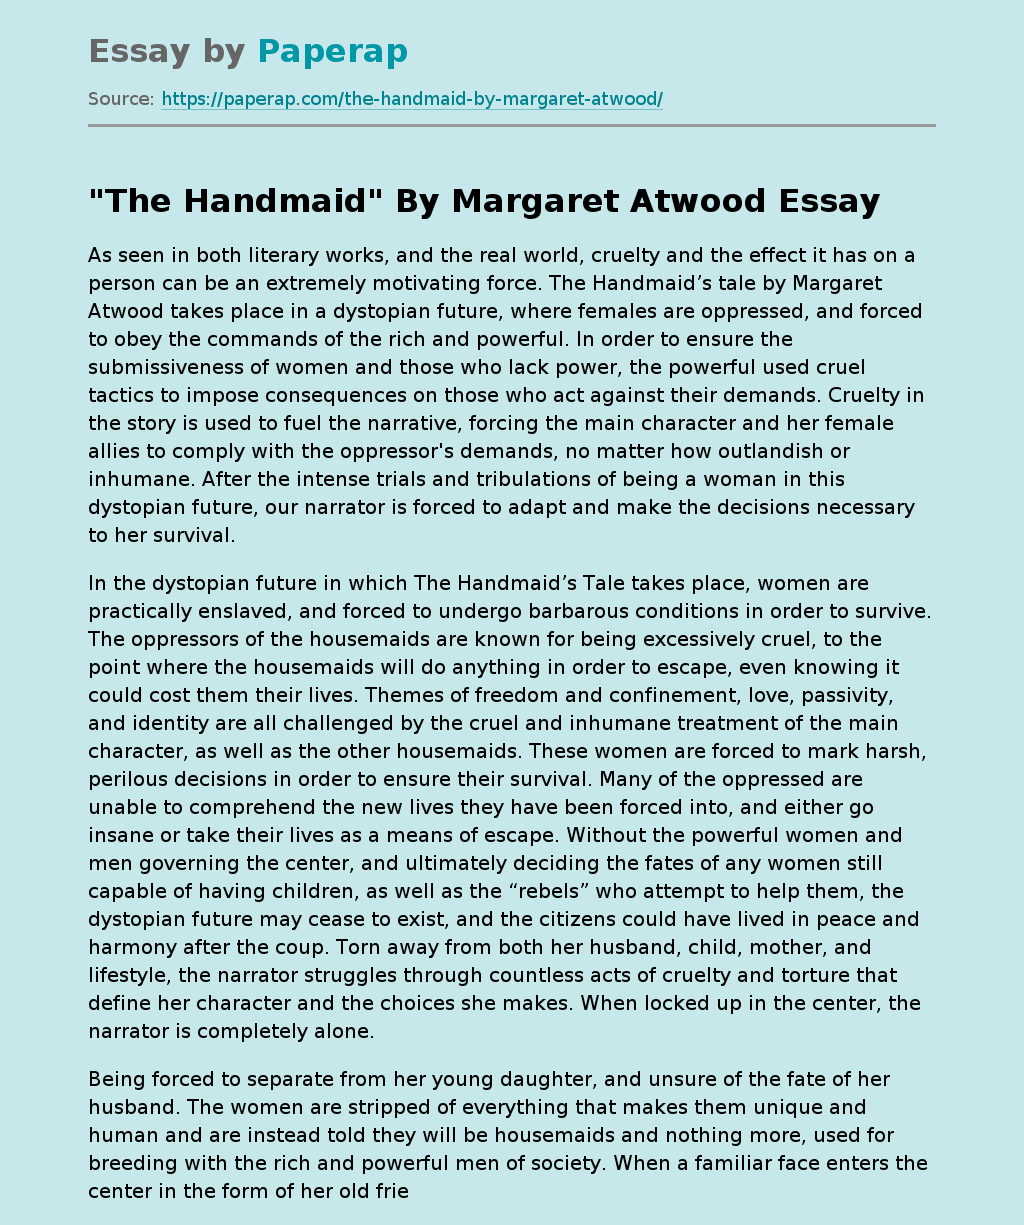 "The Handmaid" By Margaret Atwood